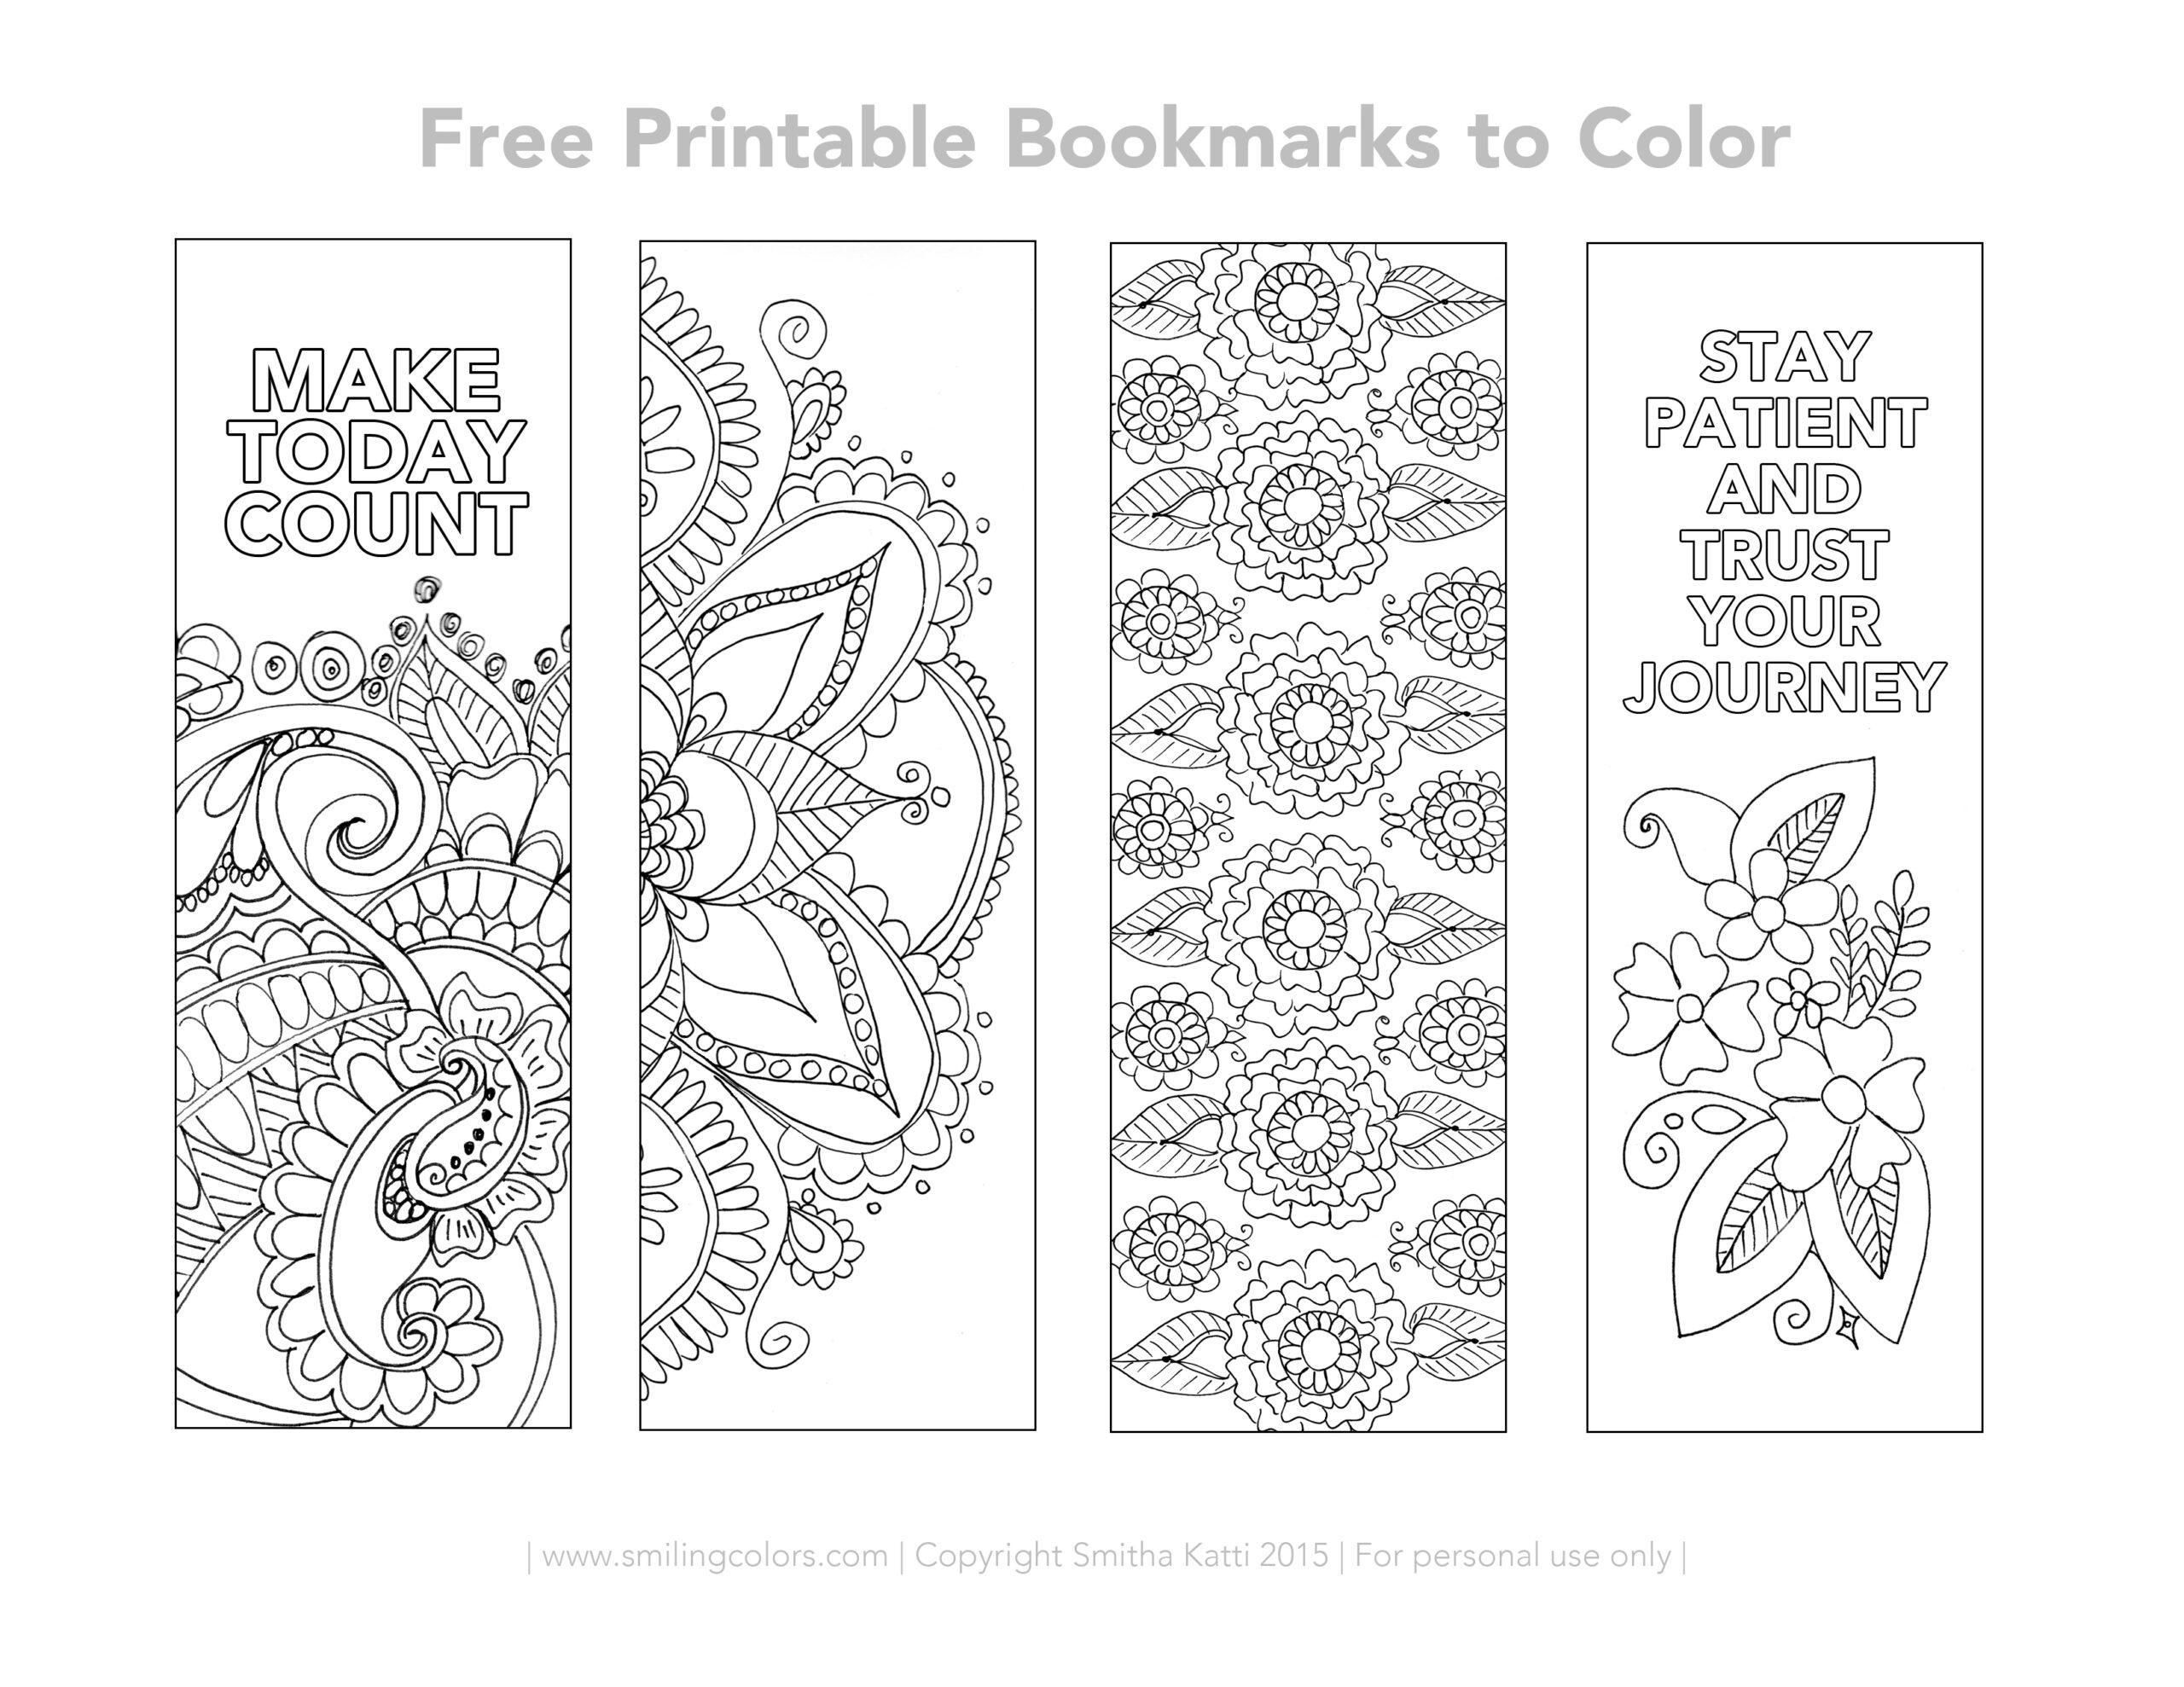 Free Printable Bookmarks To Color Smiling Colors - Free Printable Bookmarks To Color